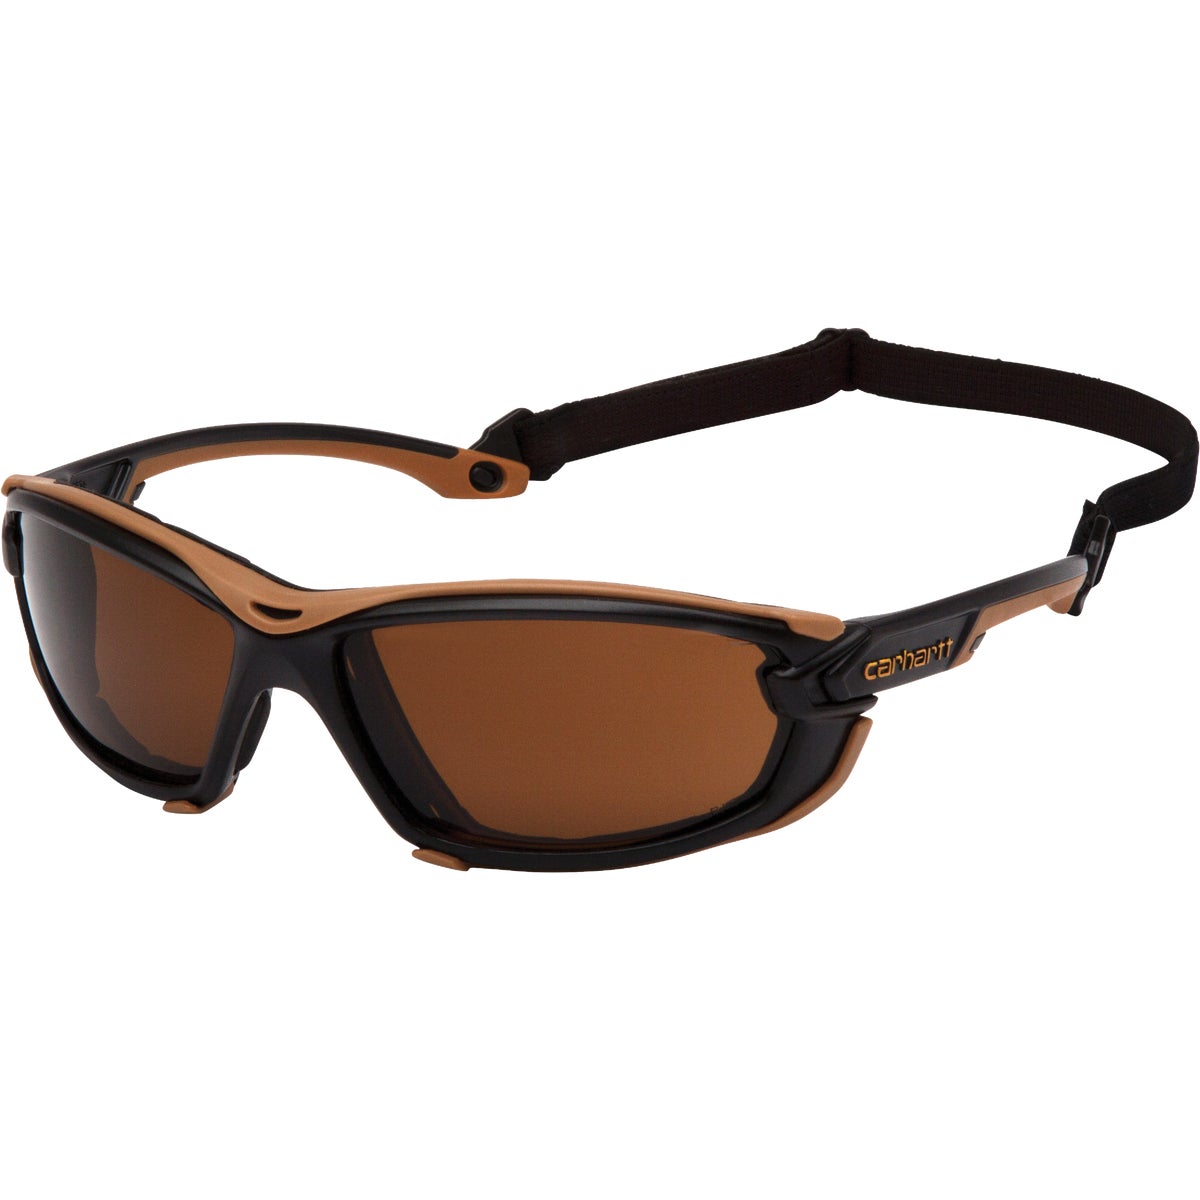 Carhartt Toccoa Black & Tan Frame Safety Glasses with Bronze H2MAX Anti-Fog Lenses